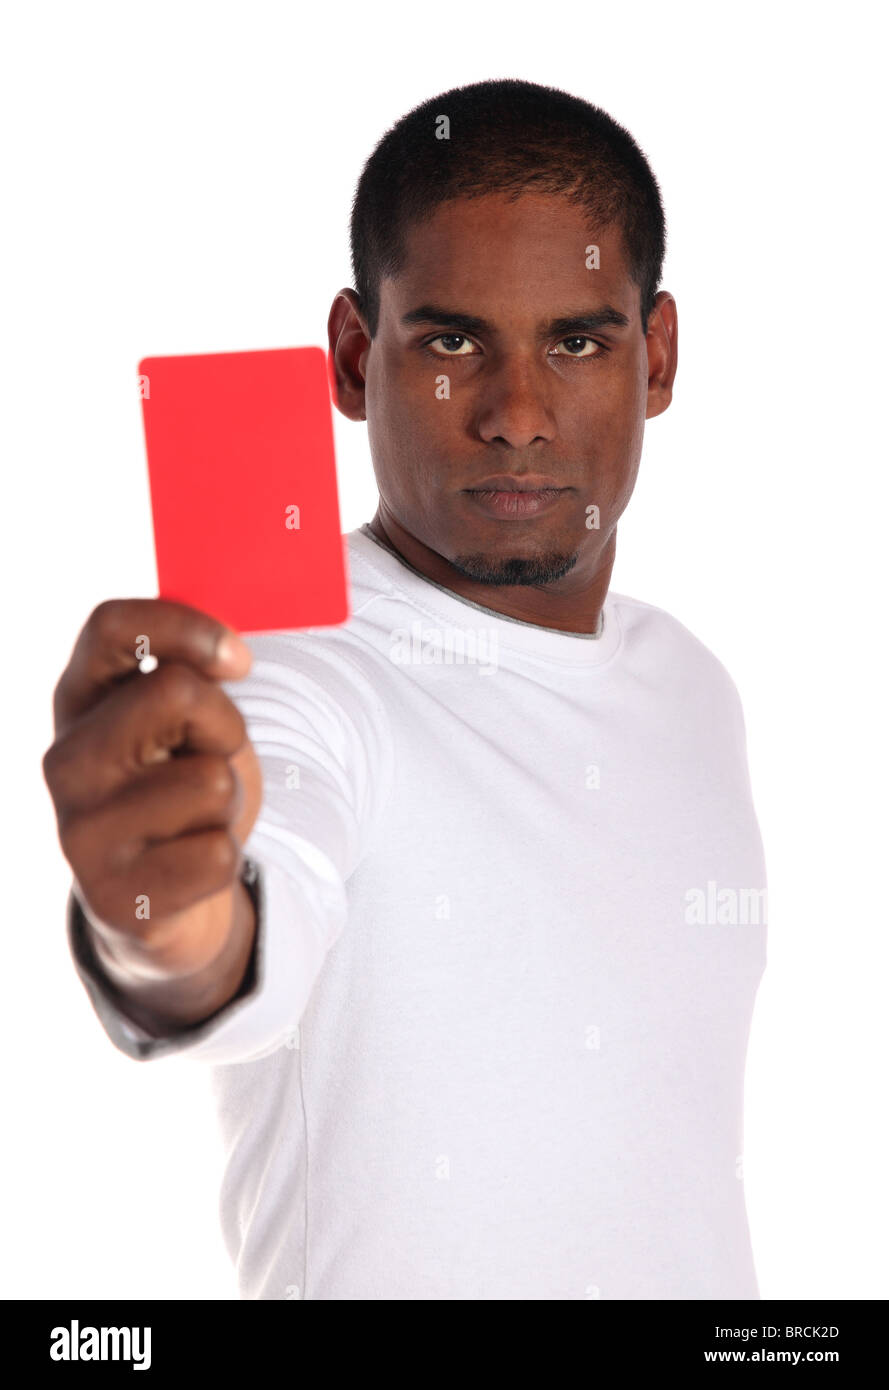 An attractive dark-skinned man showing a red card. All on white background. Stock Photo